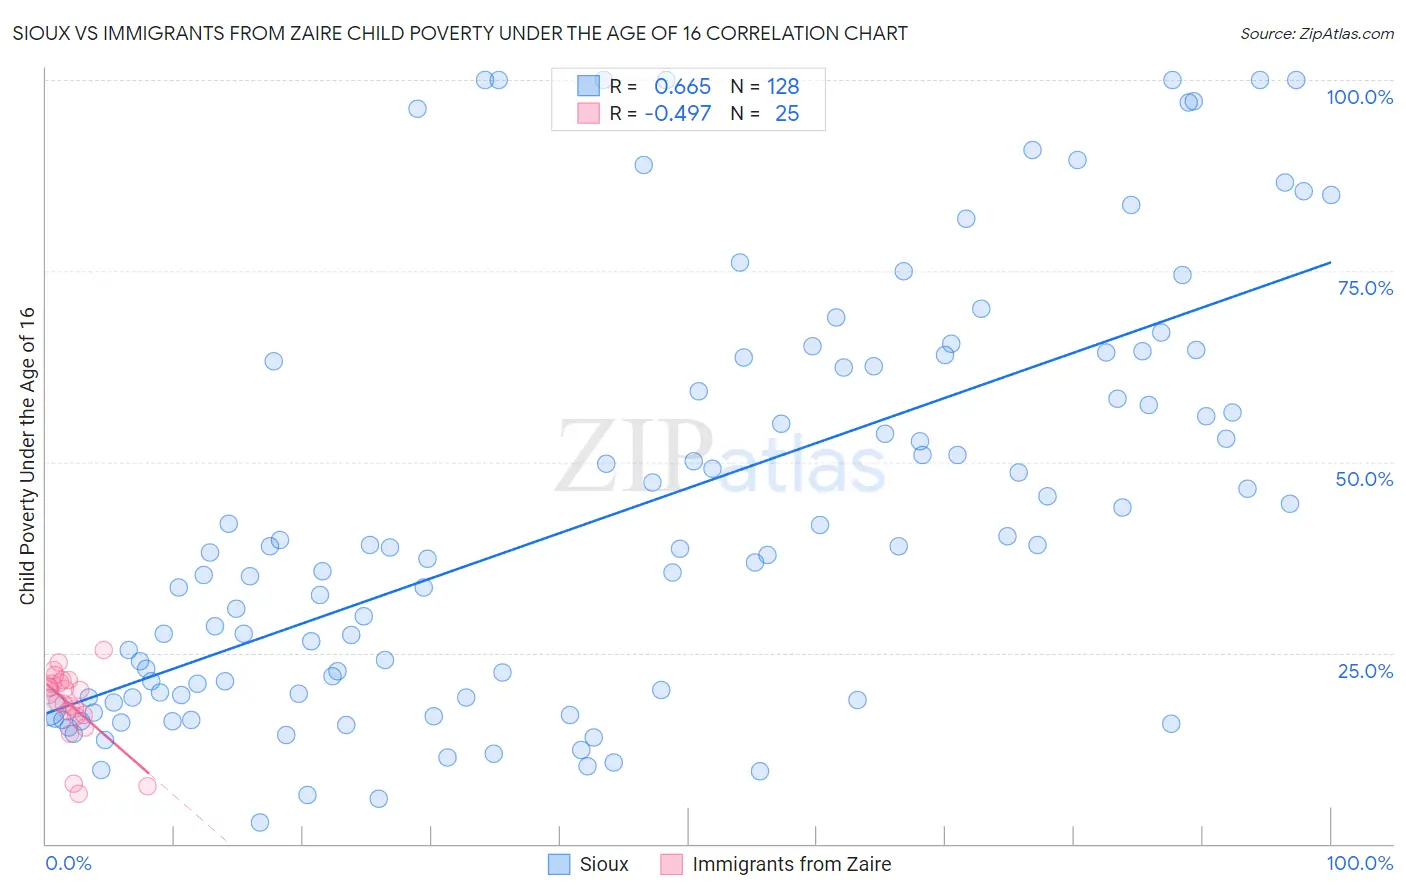 Sioux vs Immigrants from Zaire Child Poverty Under the Age of 16